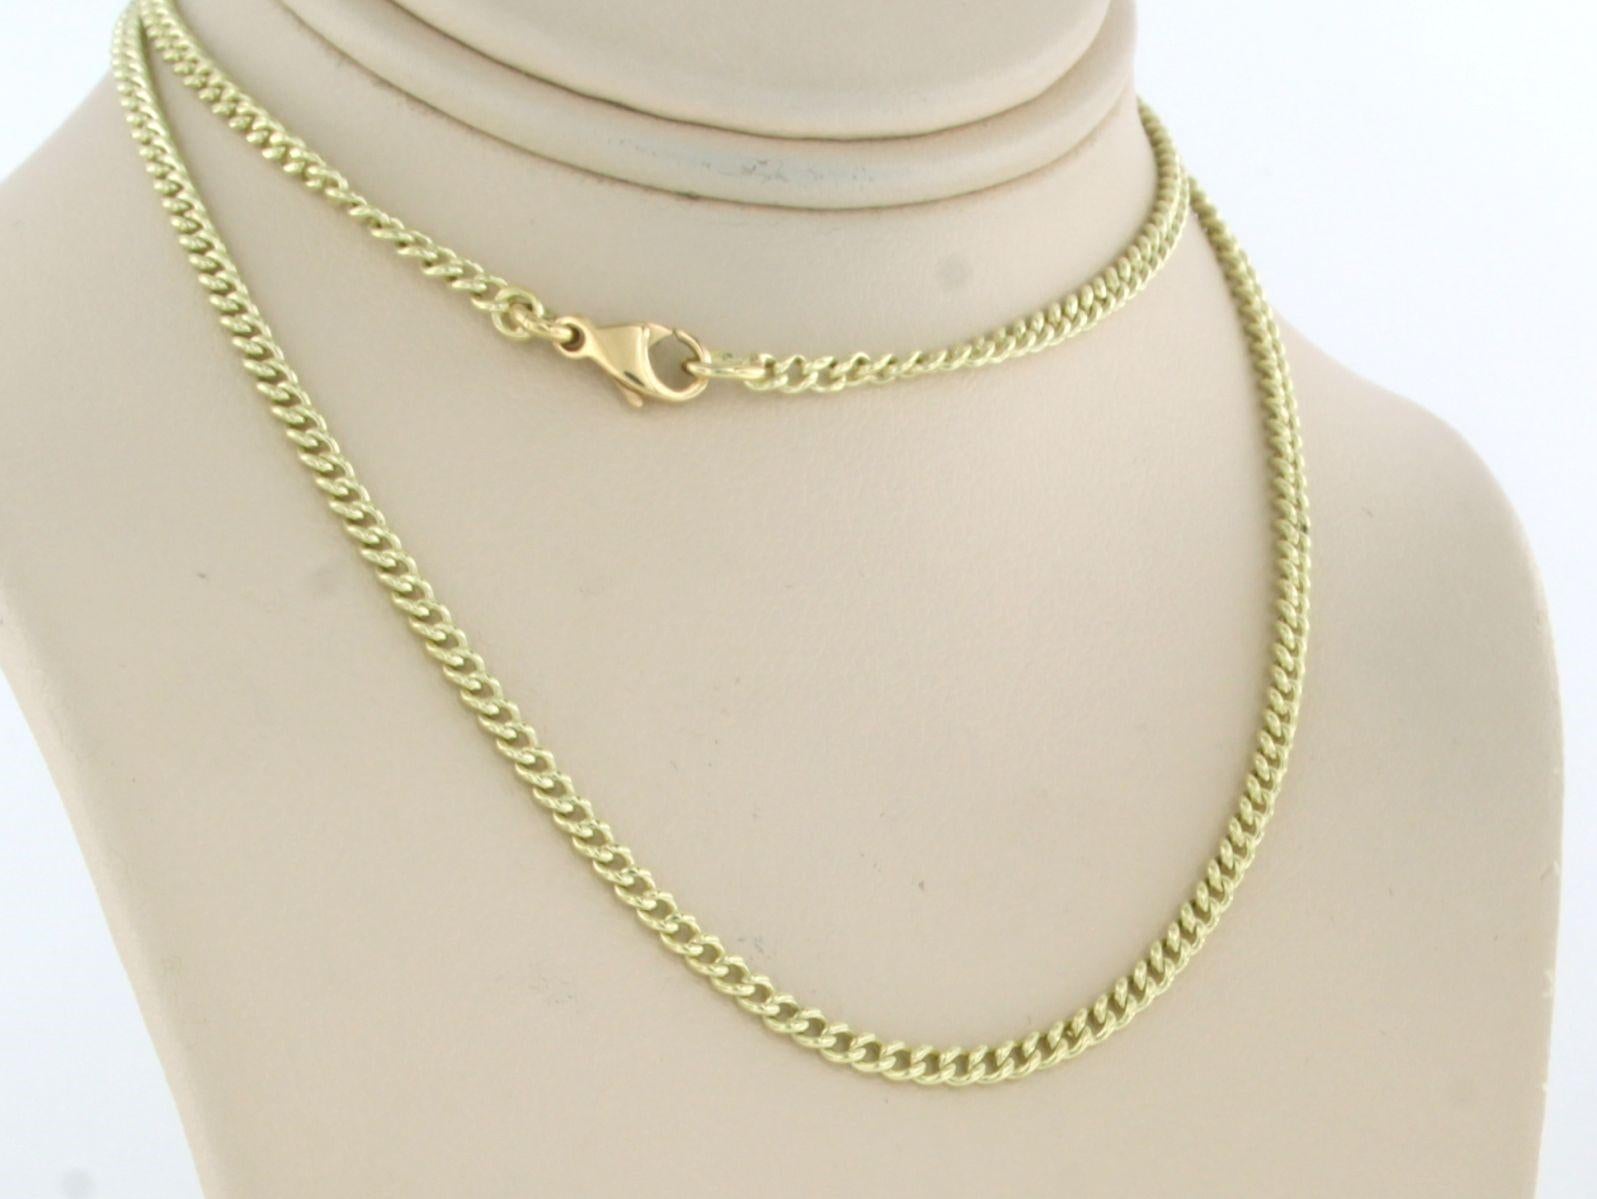 Modern 14k yellow gold necklace - 45 cm long - 8.7 gram For Sale